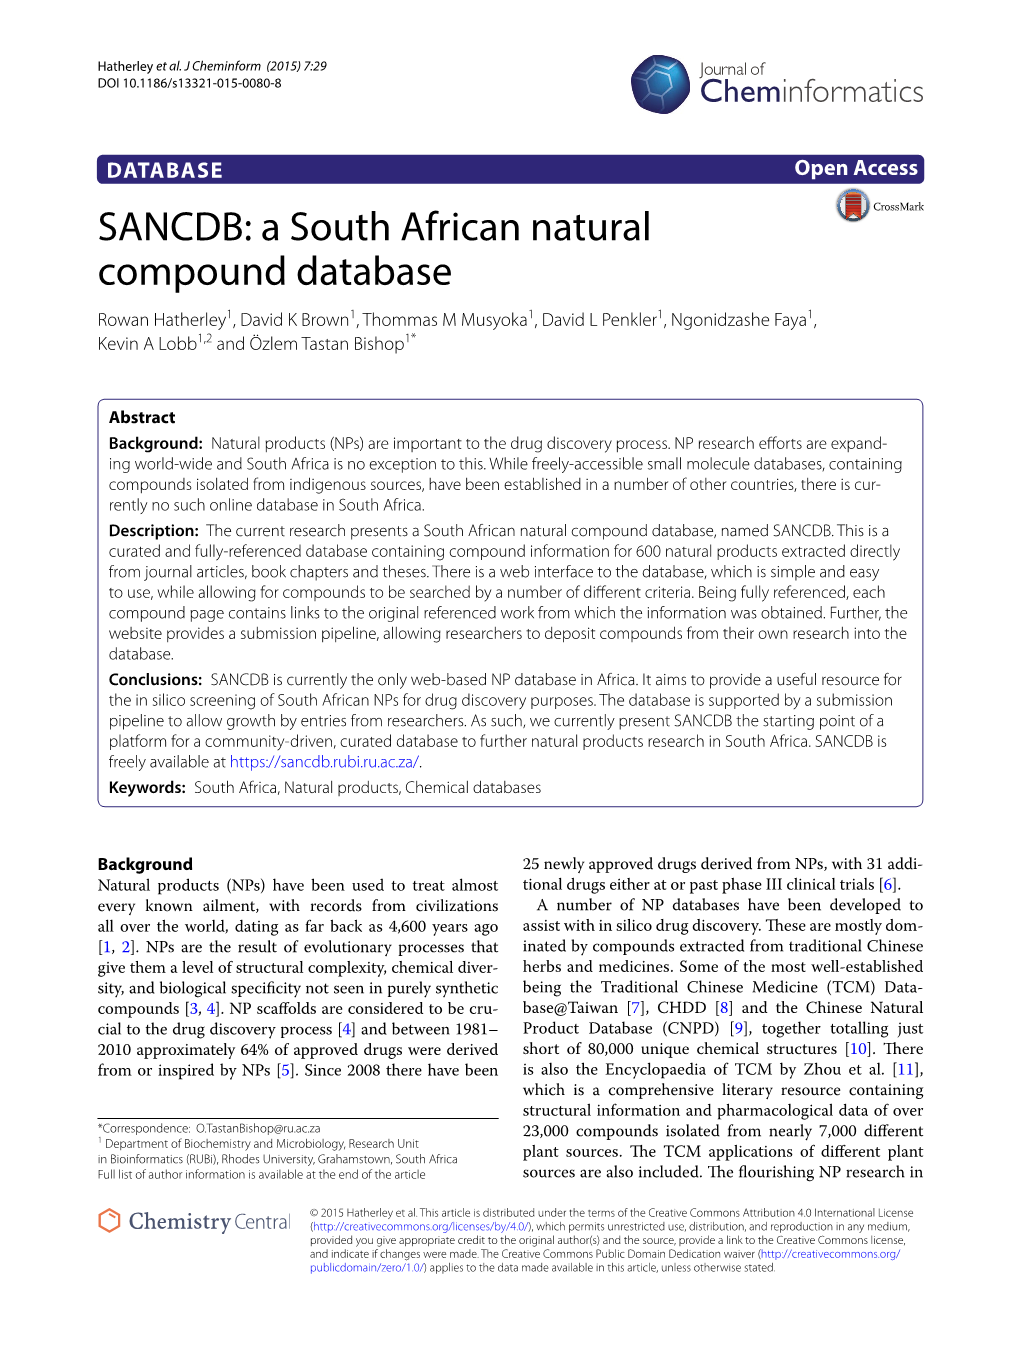 SANCDB: a South African Natural Compound Database